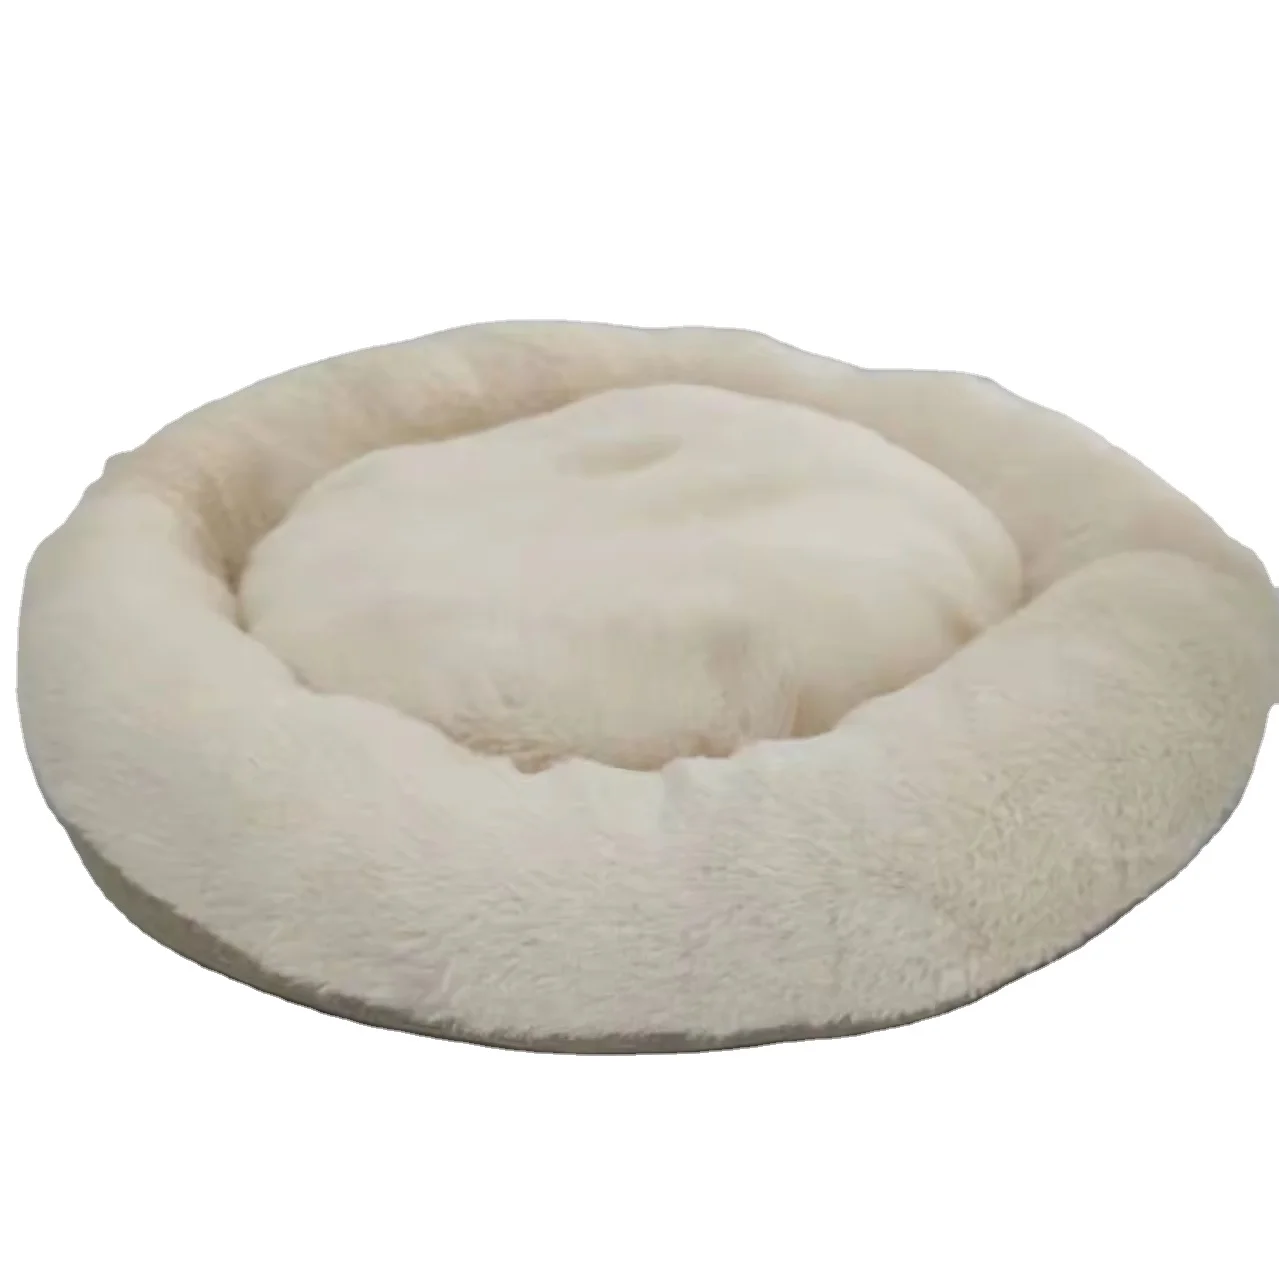 Pet sleeping beds cashmere dog bed mat sofa for small medium and large dogs pet